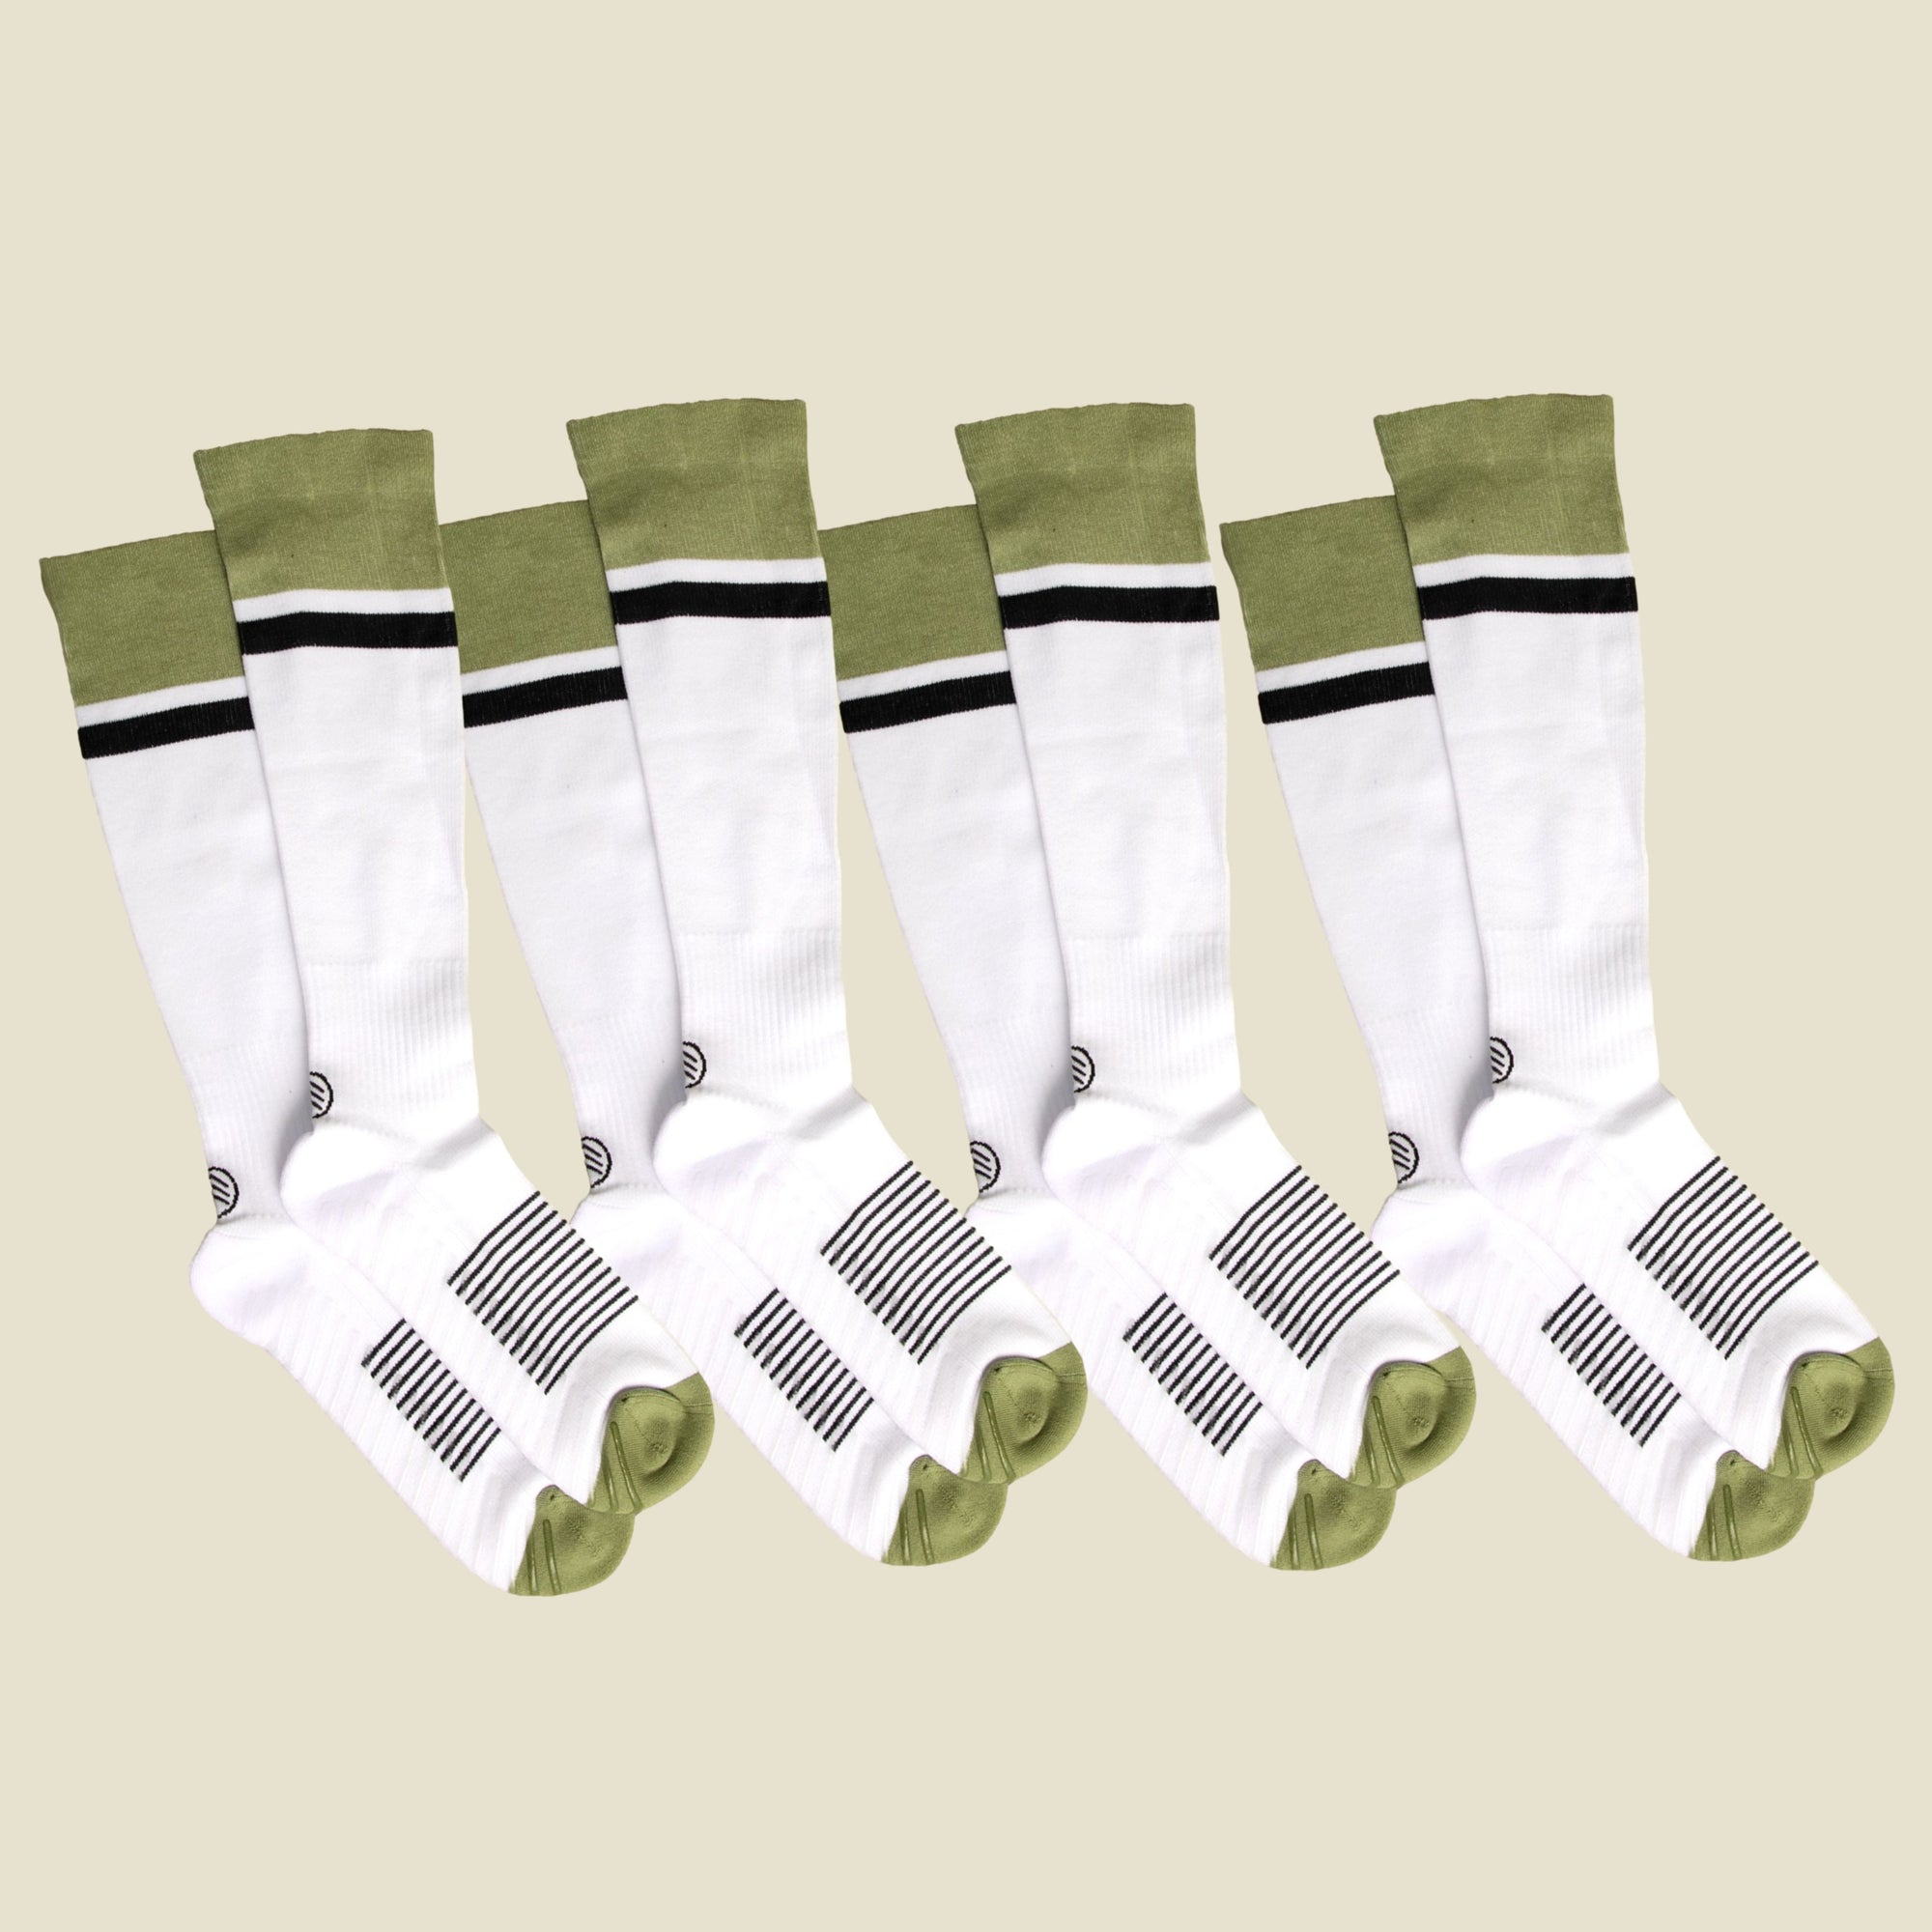 Men's White/Black/Green Compression Socks with Grips - 4 Pairs - Gripjoy Socks